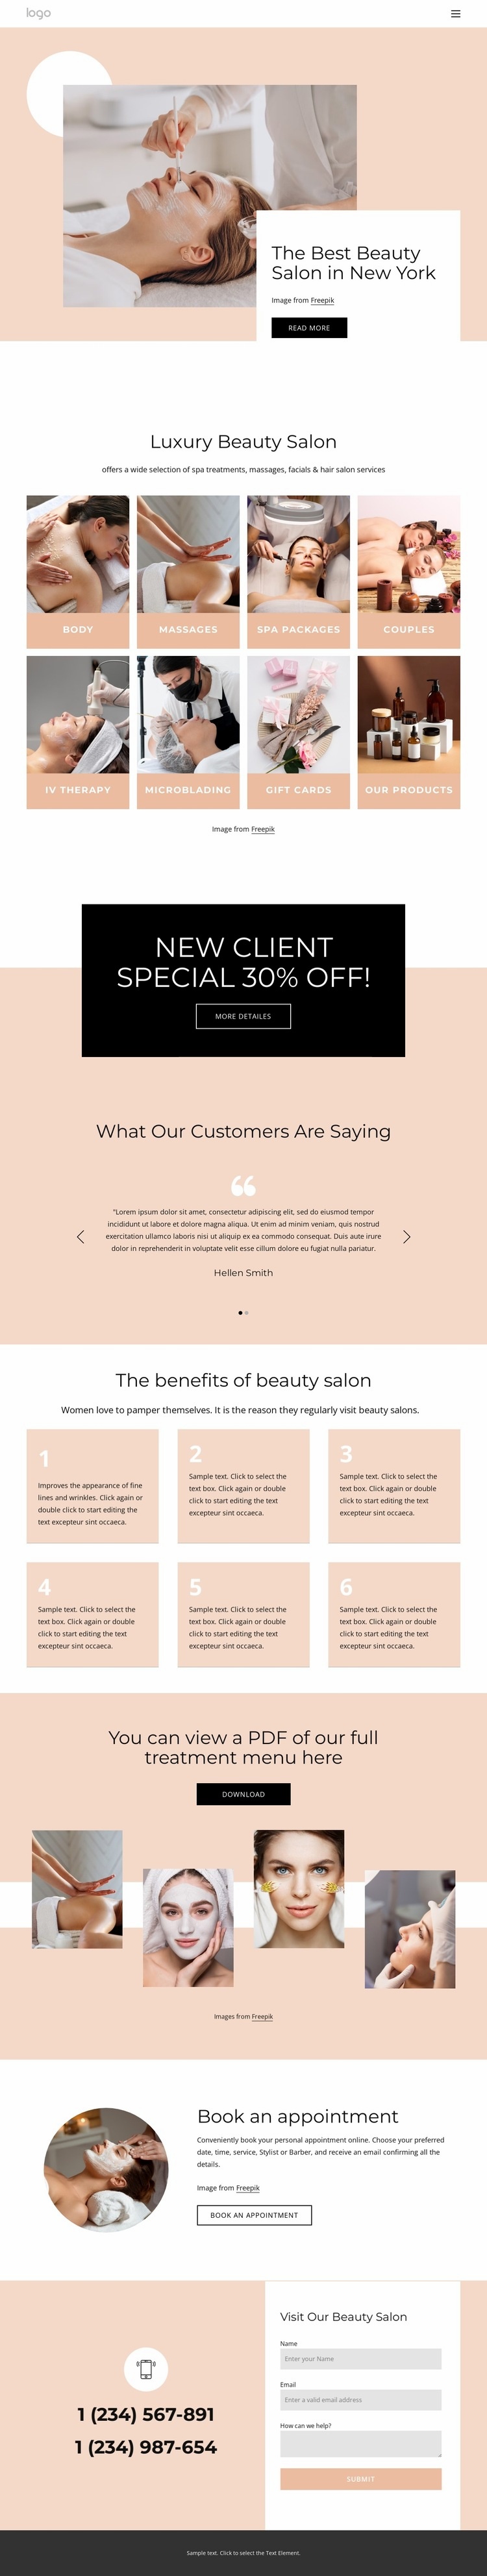 The best beauty salon in NYC Web Page Design